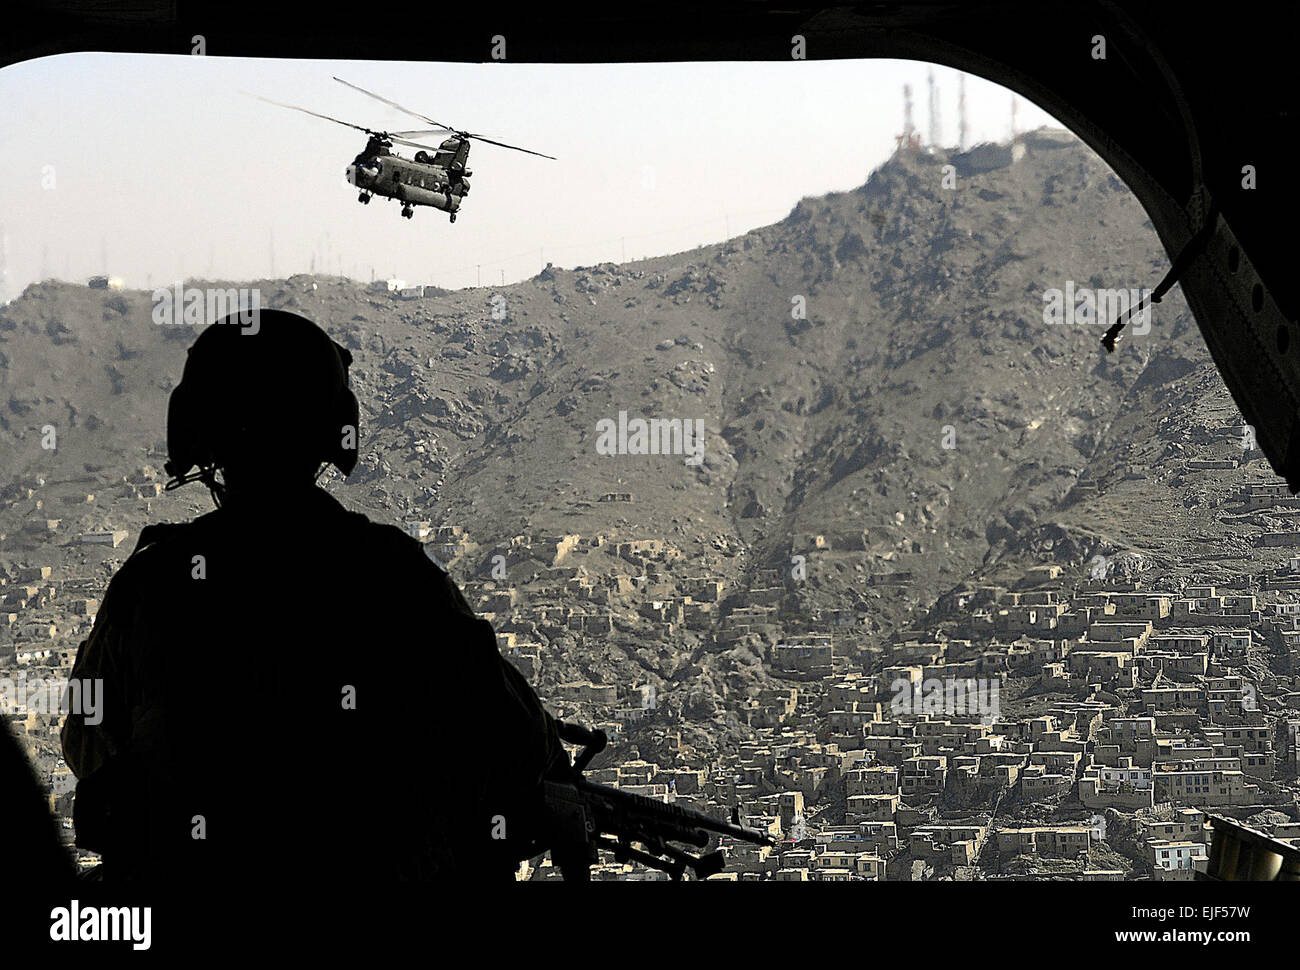 A CH-47 Chinook helicopter flies over Kabul, Afghanistan, June 4, 2007.   Cherie A. Thurlby. Released Stock Photo